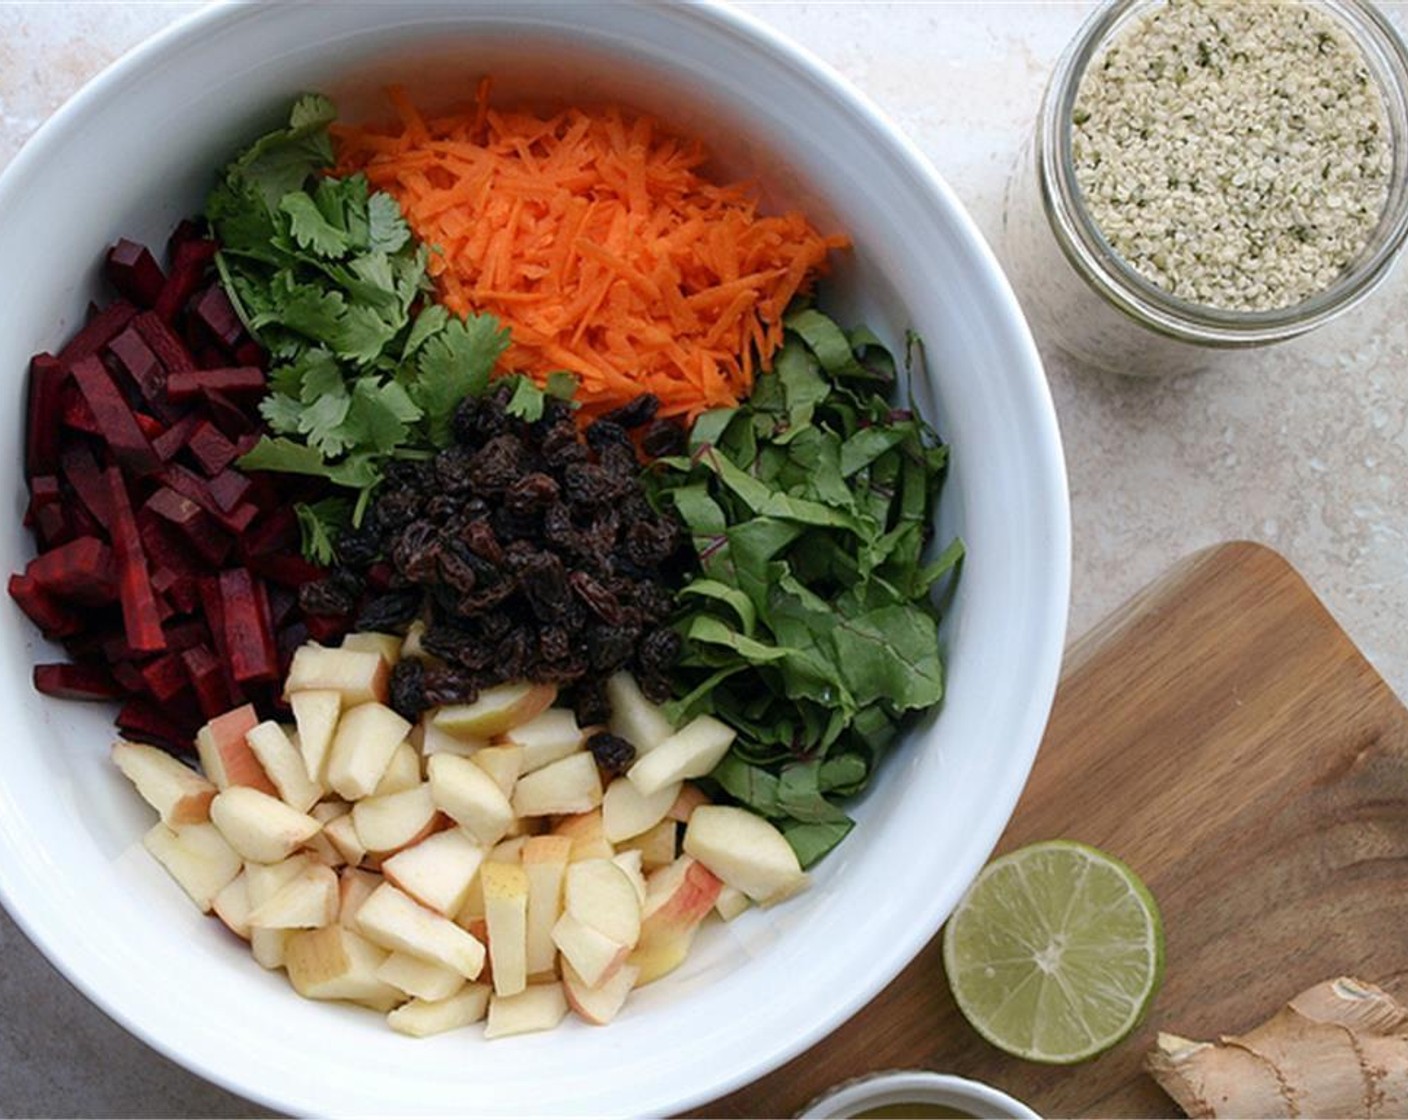 step 6 Place the carrots, apples, beets, chopped greens, Golden Raisins (1/2 cup), and cilantro in a large bowl.